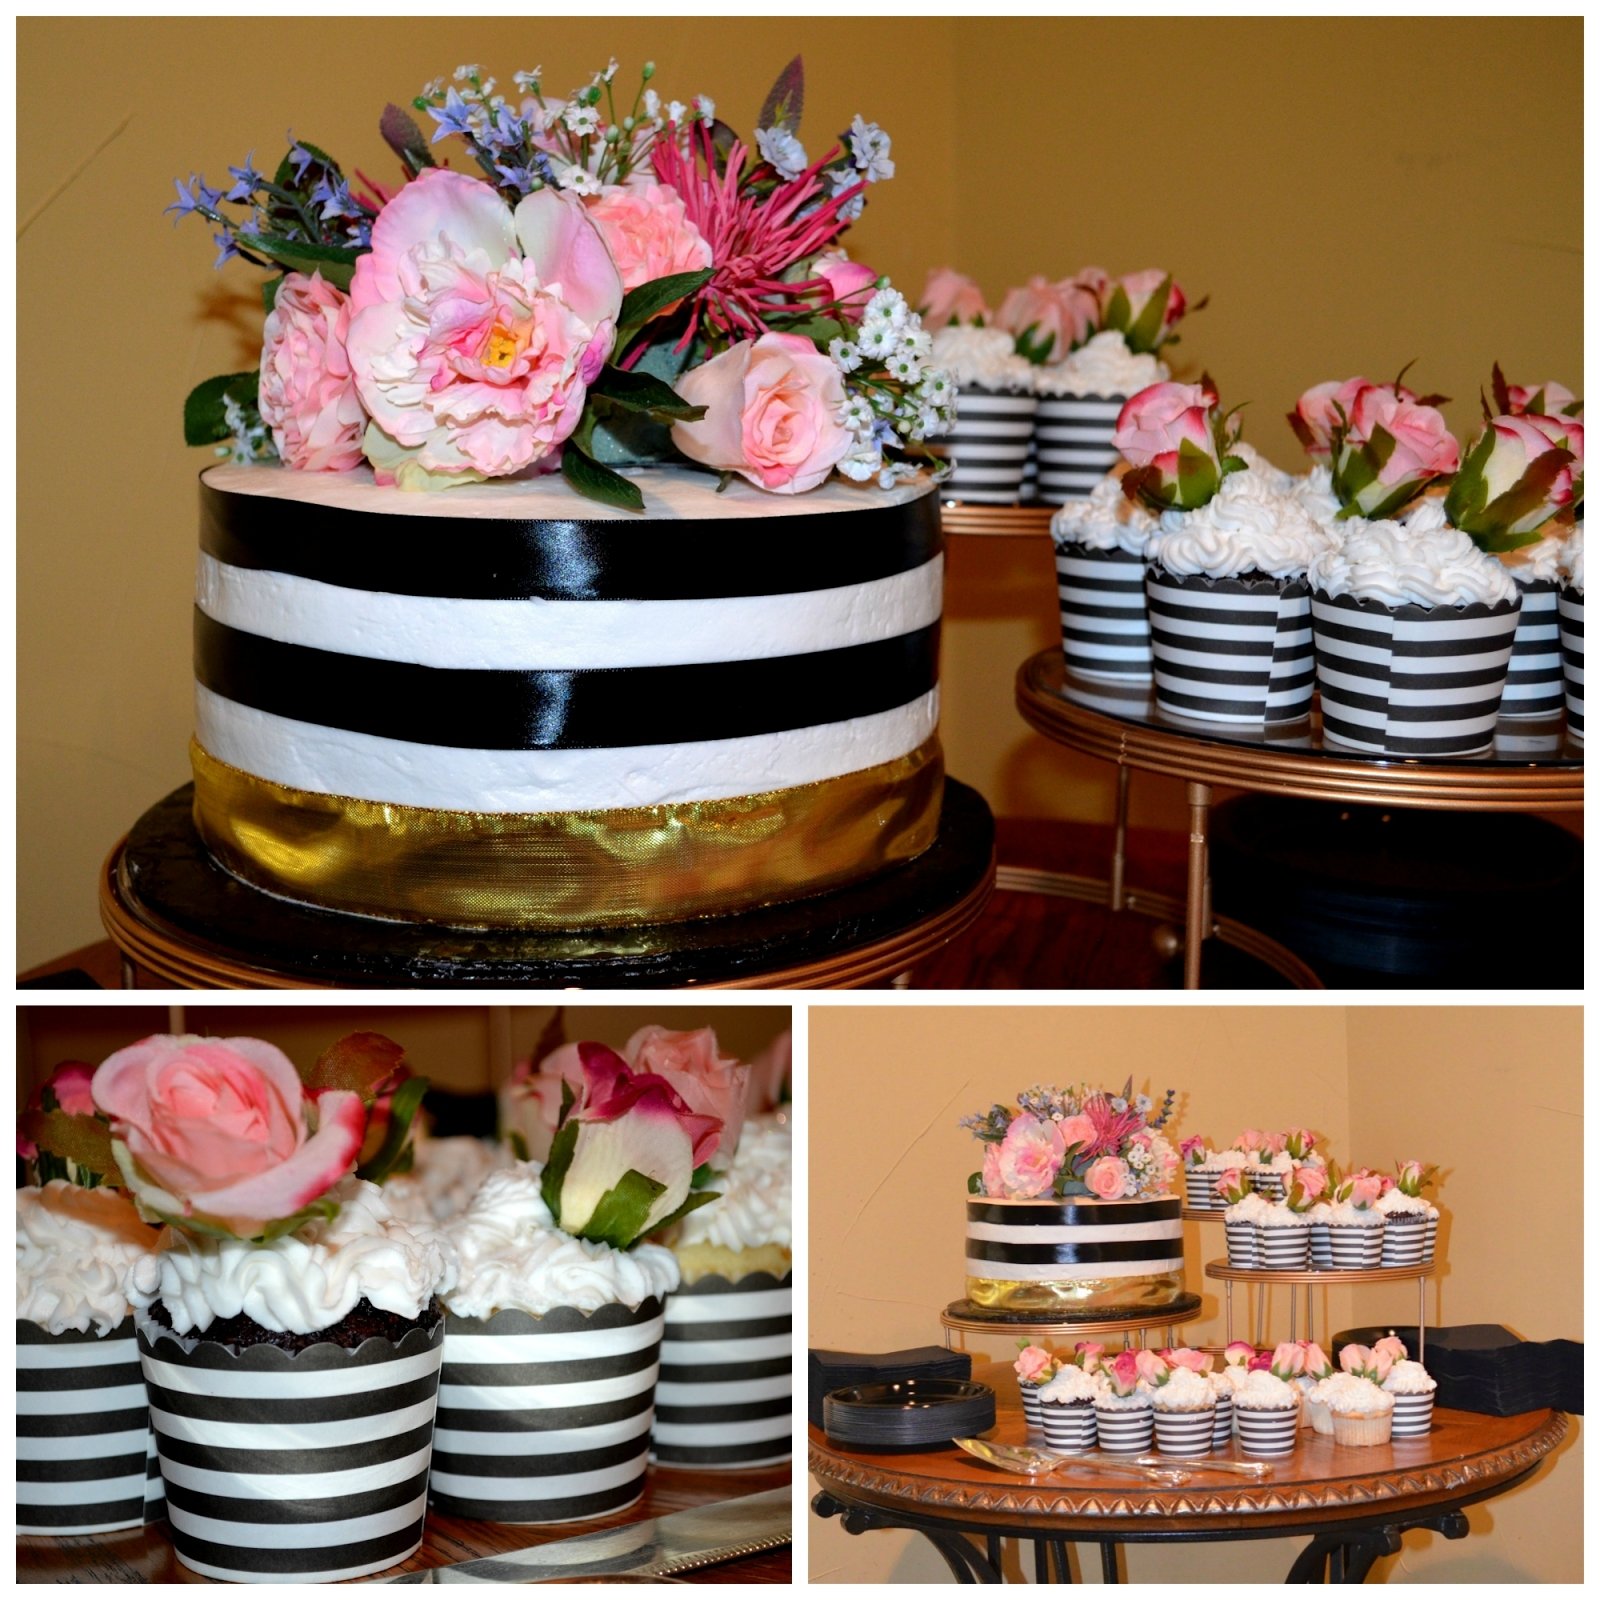 10 Best Black And White Bridal Shower Ideas a wine tasting bridal shower black and white striped cake and 2022